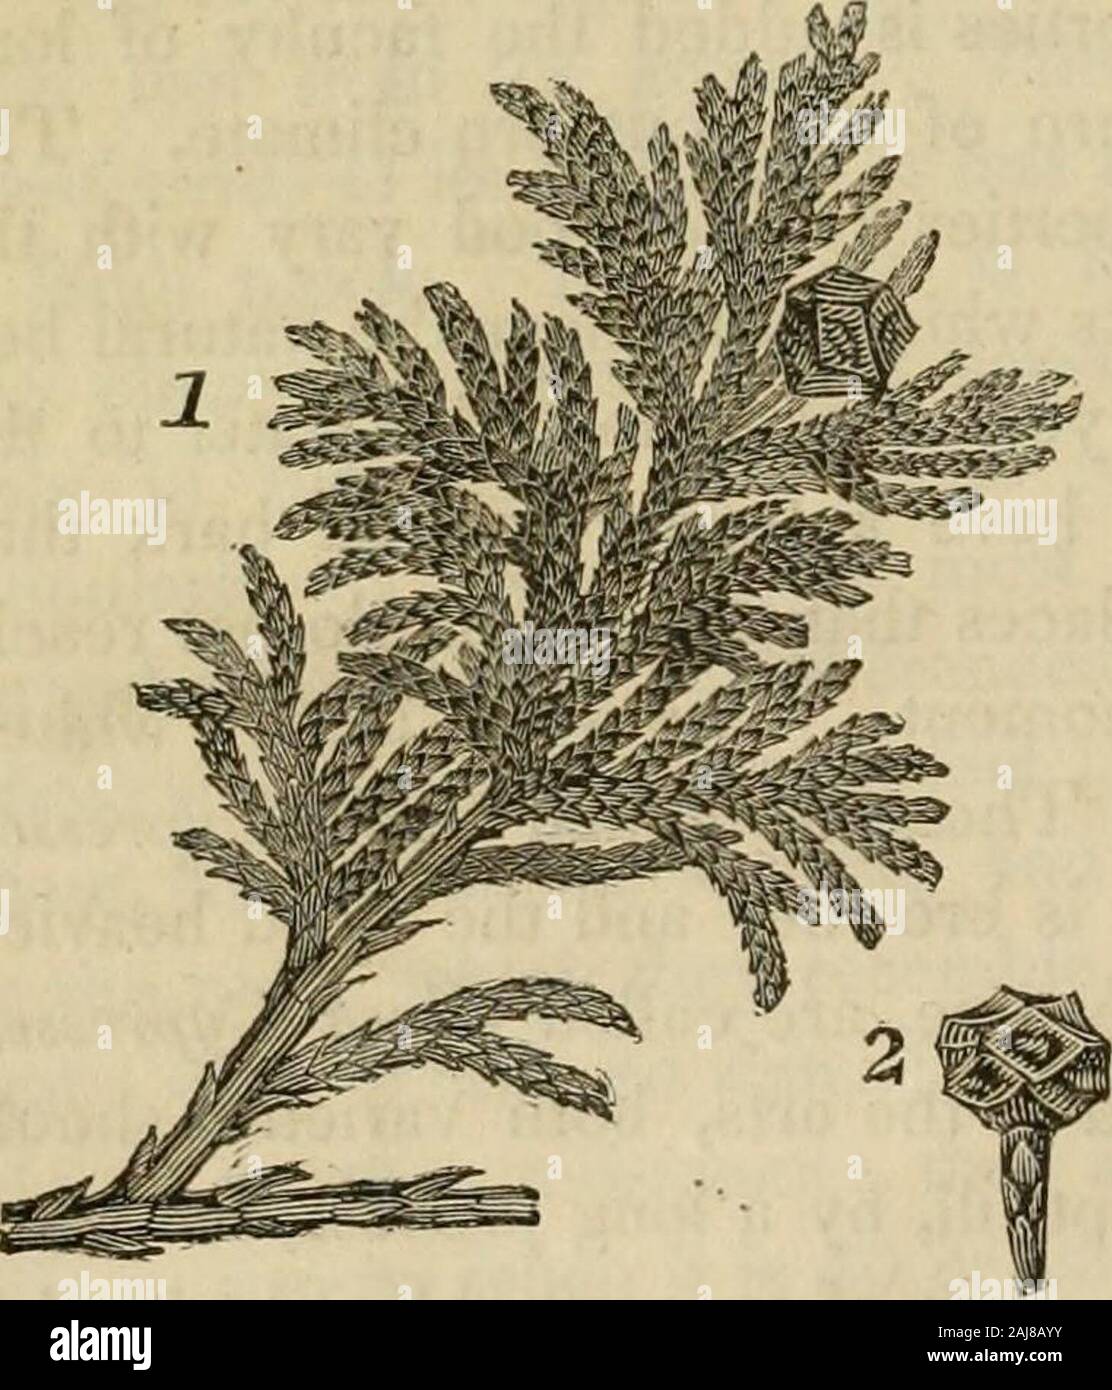 The sylva americana; or, A description of the forest trees indigenous to the United States, practically and botanically considered . hoose it for the inside of mahogany furniture.It is highly proper for the masts and sides of vessels, and whereverit grows it is chosen for canoes, which are fashioned from a singletrunk, and are often 30 feet long and 5 feet wide, light, solid andmore durable than those of any other tree. It makes the best pipesto convey water under ground ; especially the black variety,which is more resinous and solid. White Cedar. Cupressus thyoides. Among the resinous treesof Stock Photo